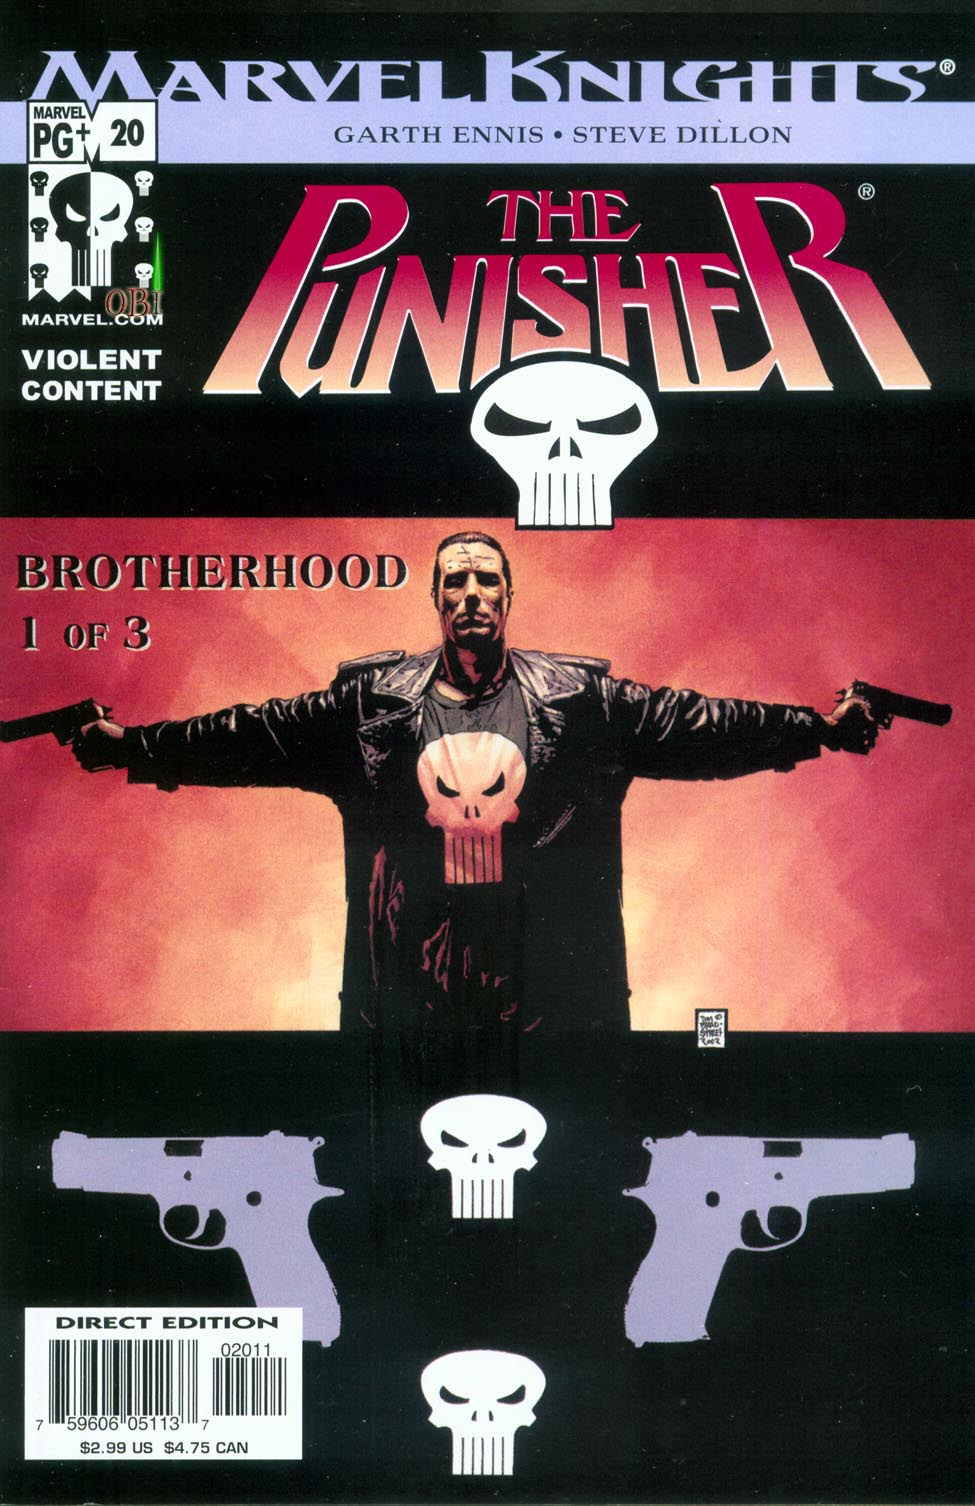 The Punisher (2001) issue 20 - Brotherhood #01 - Page 1